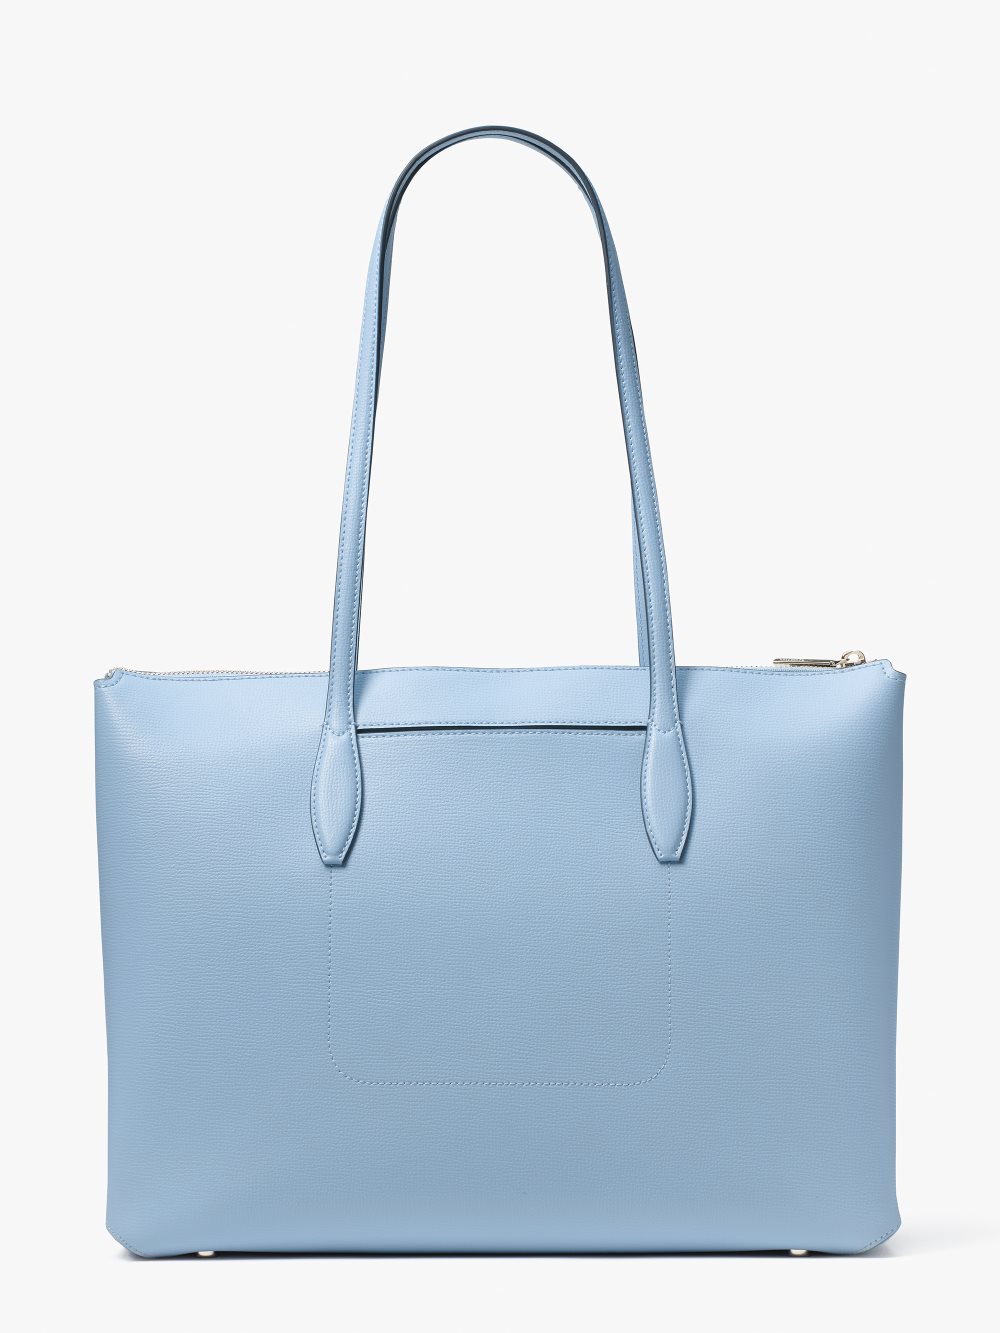 Women's celeste blue all day large zip-top tote | Kate Spade